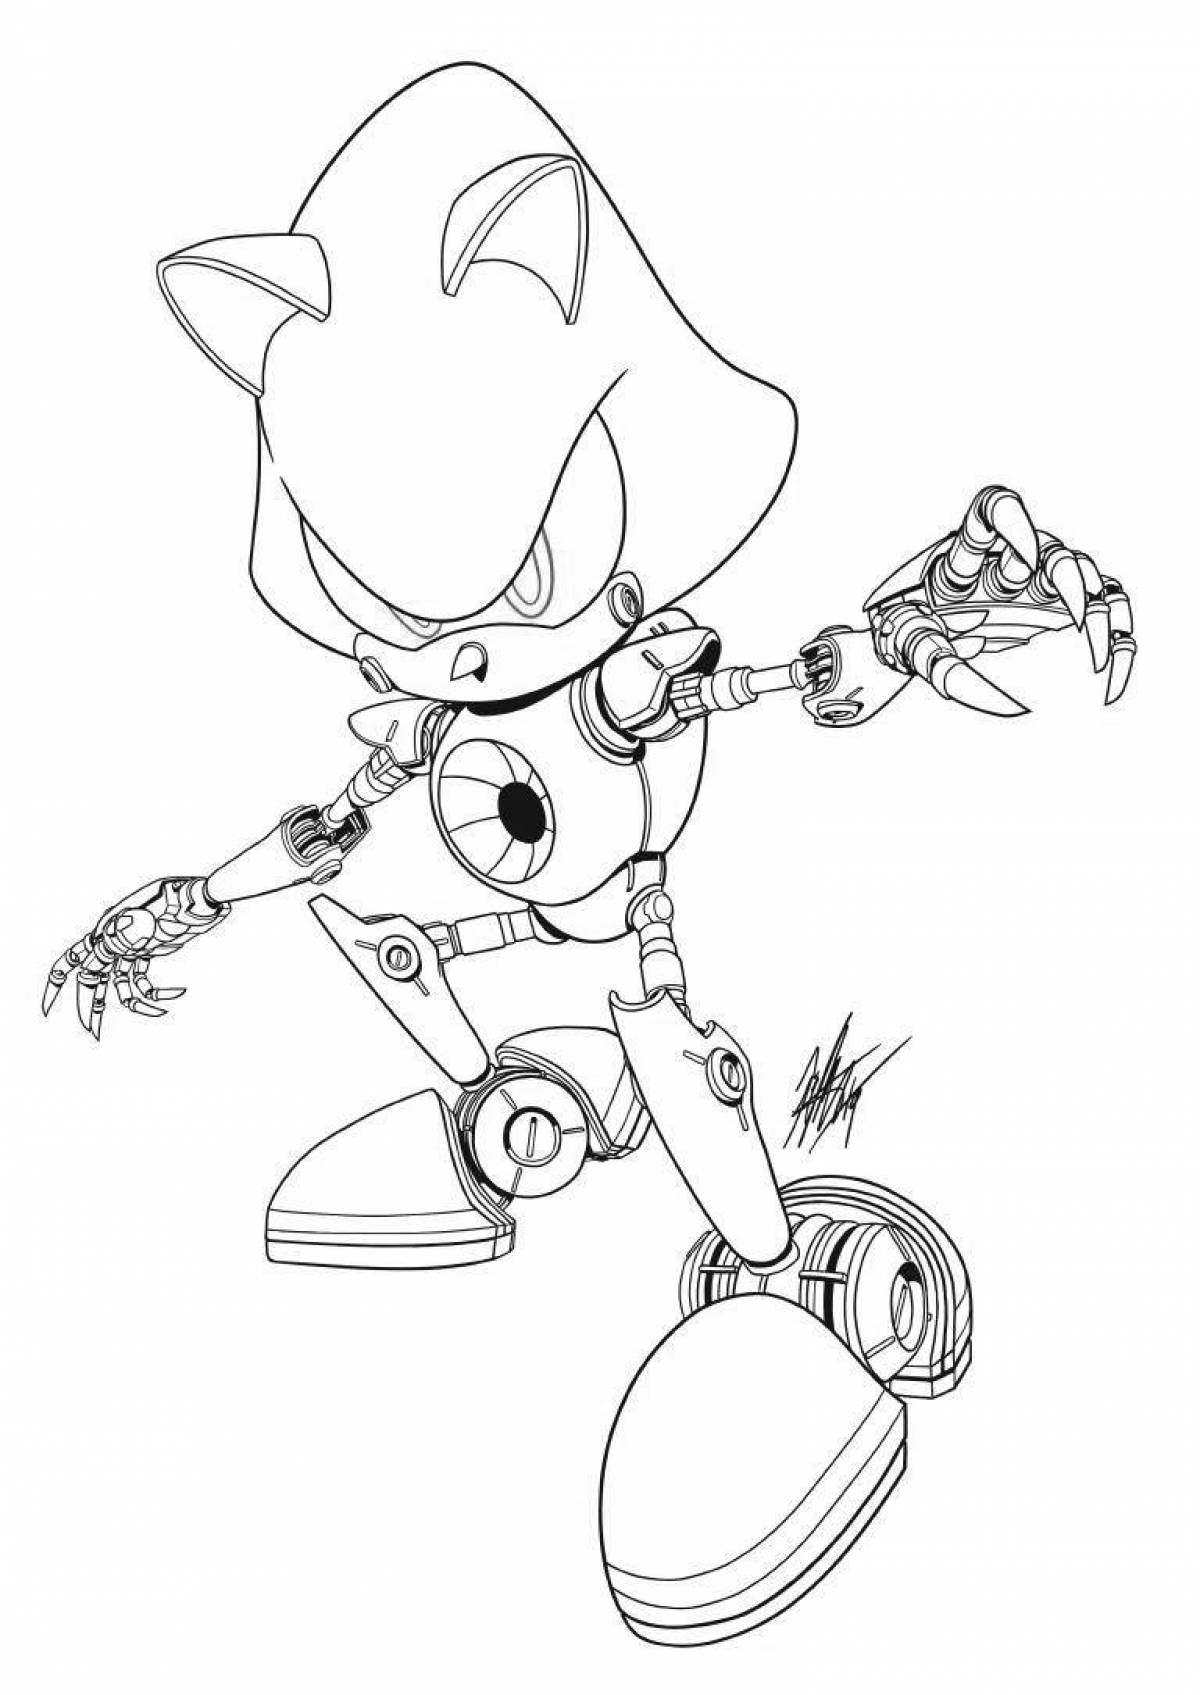 Intriguing sonic robot coloring book